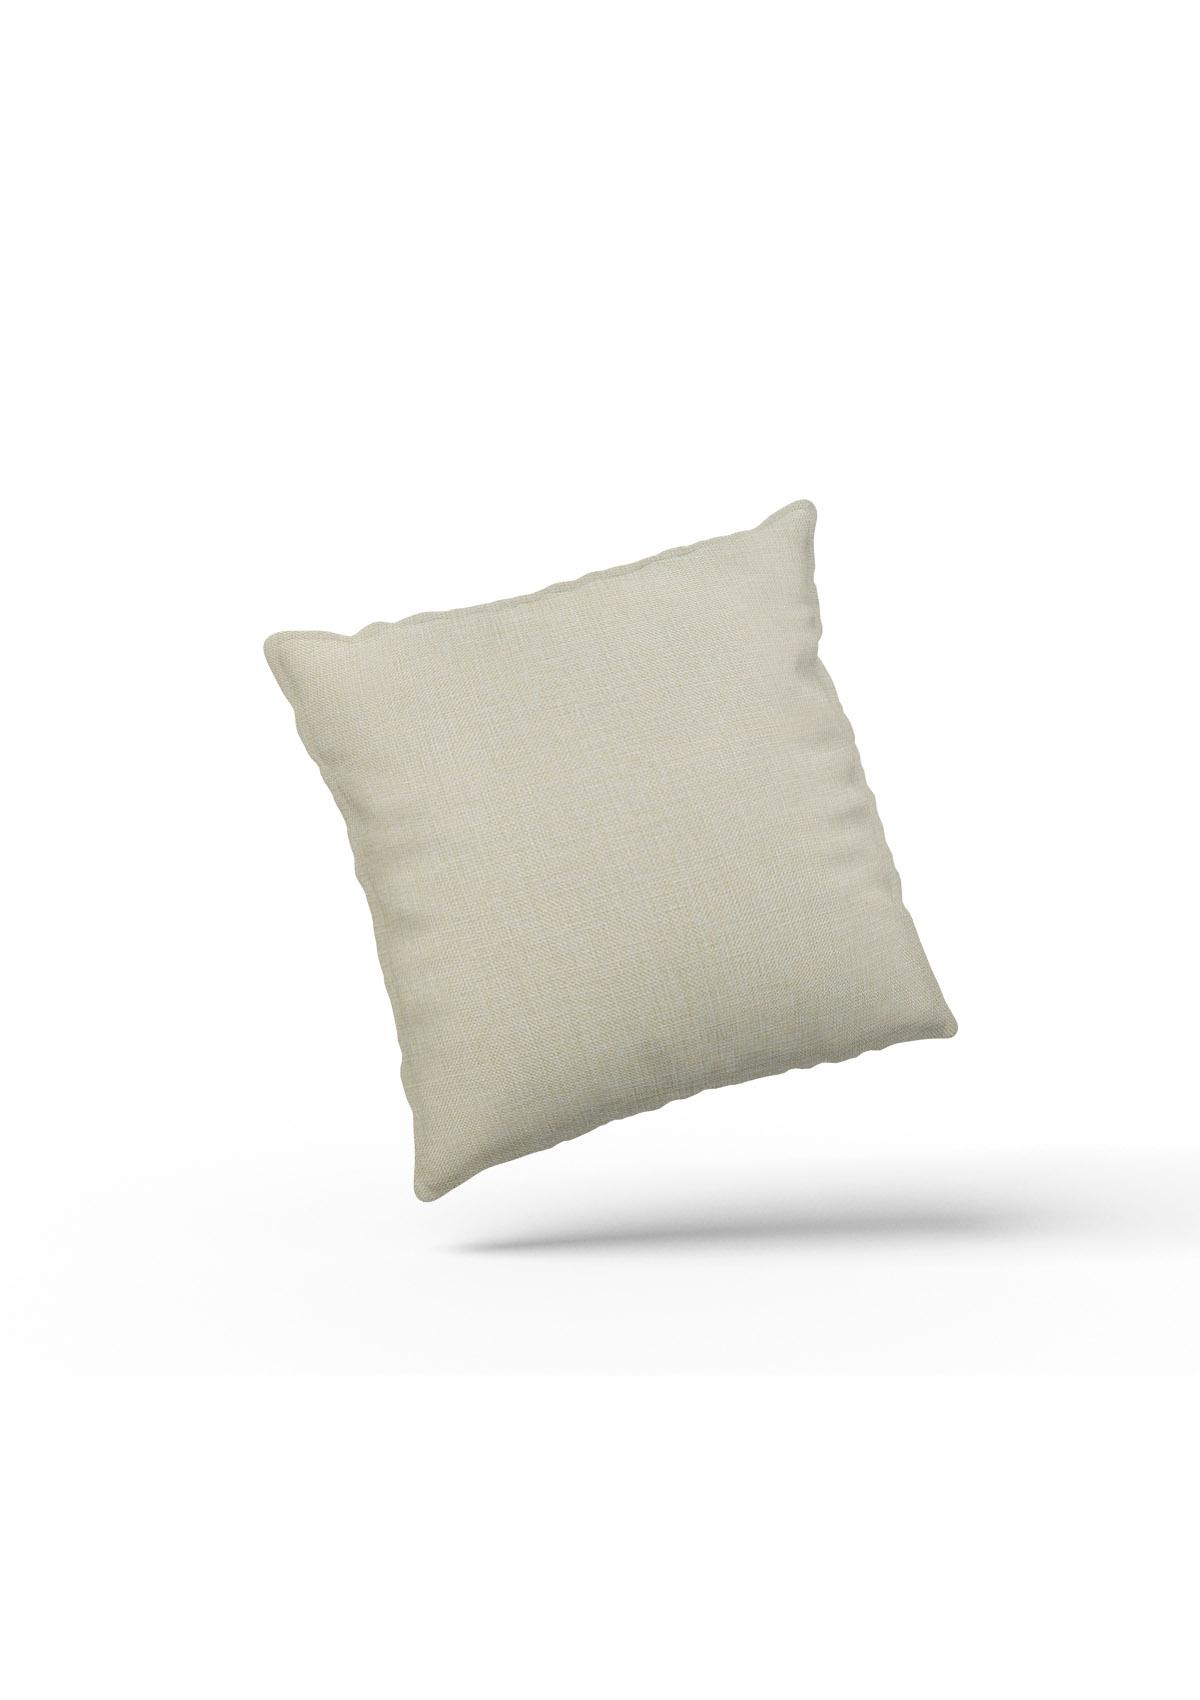 India's Black and White "Finest" Cushion Covers